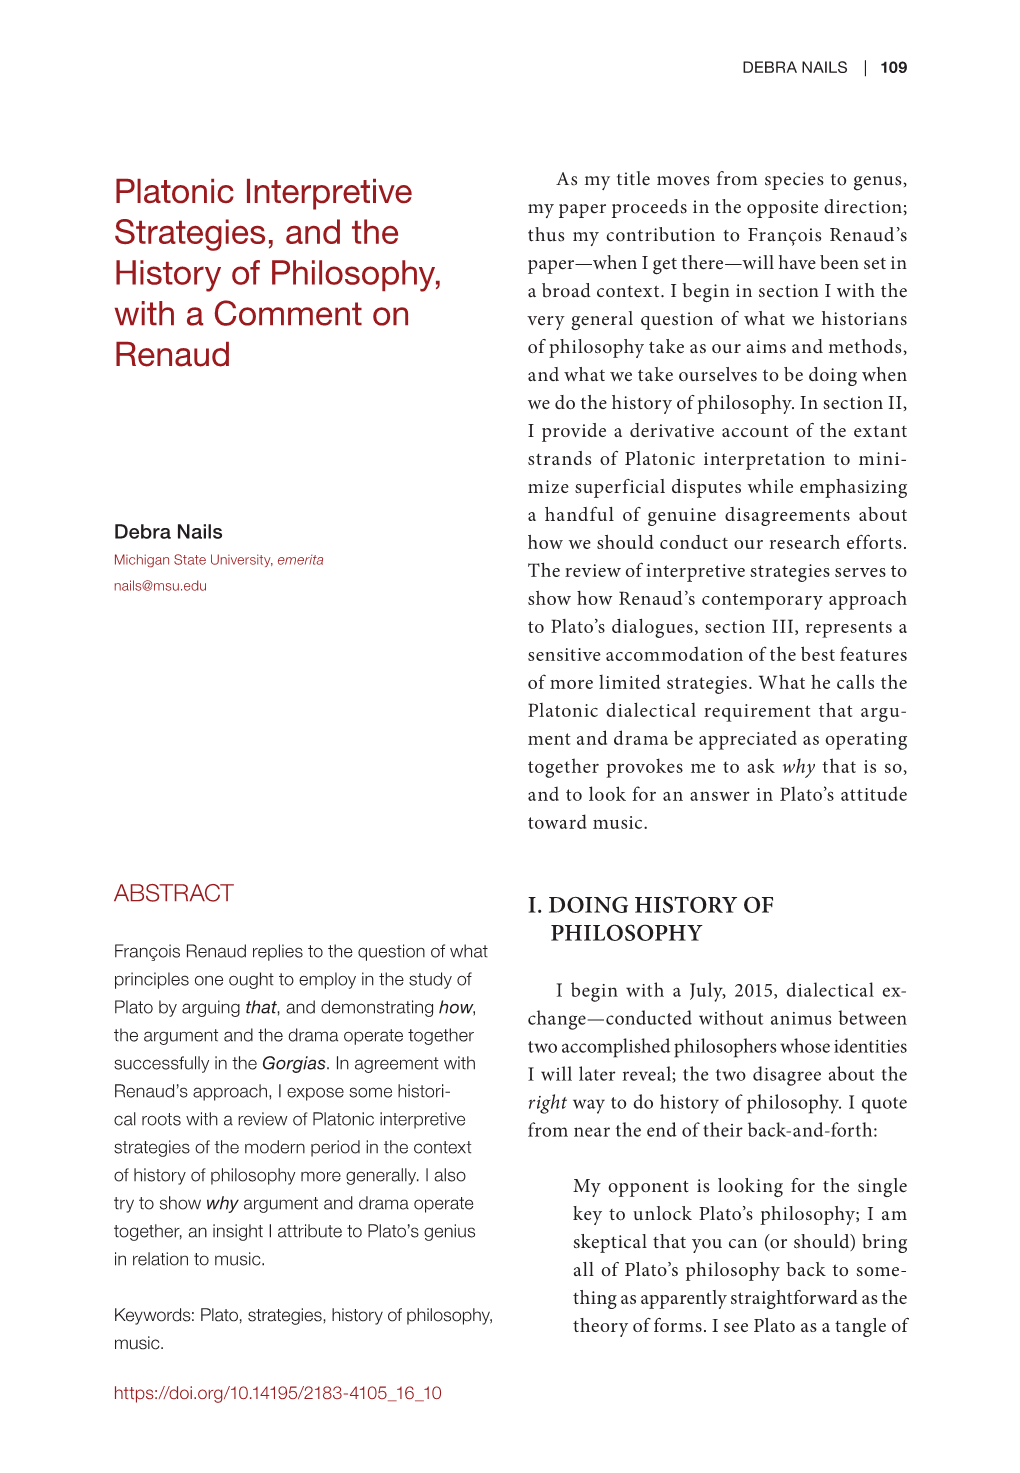 Platonic Interpretive Strategies, and the History of Philosophy, with a Comment on Renaud